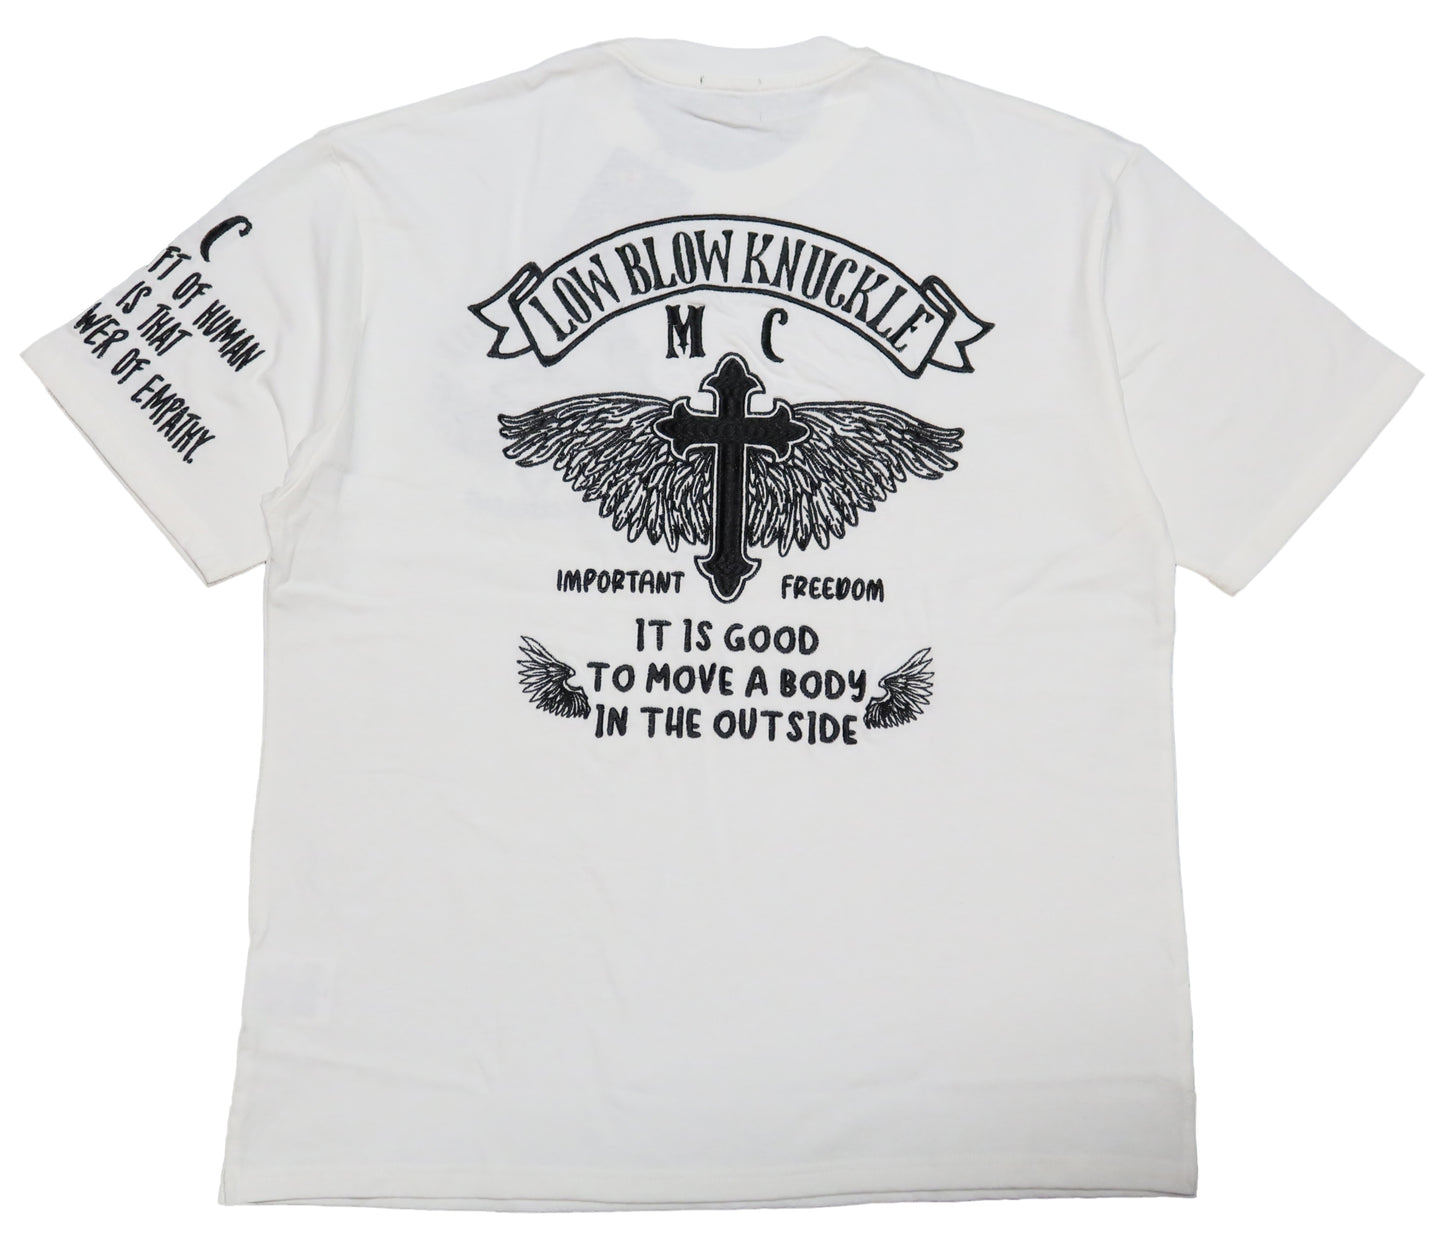 LOW BLOW KNUCKLE Lowbrow Knuckle T-shirt Cross Wings Embroidery Short Sleeve 554362